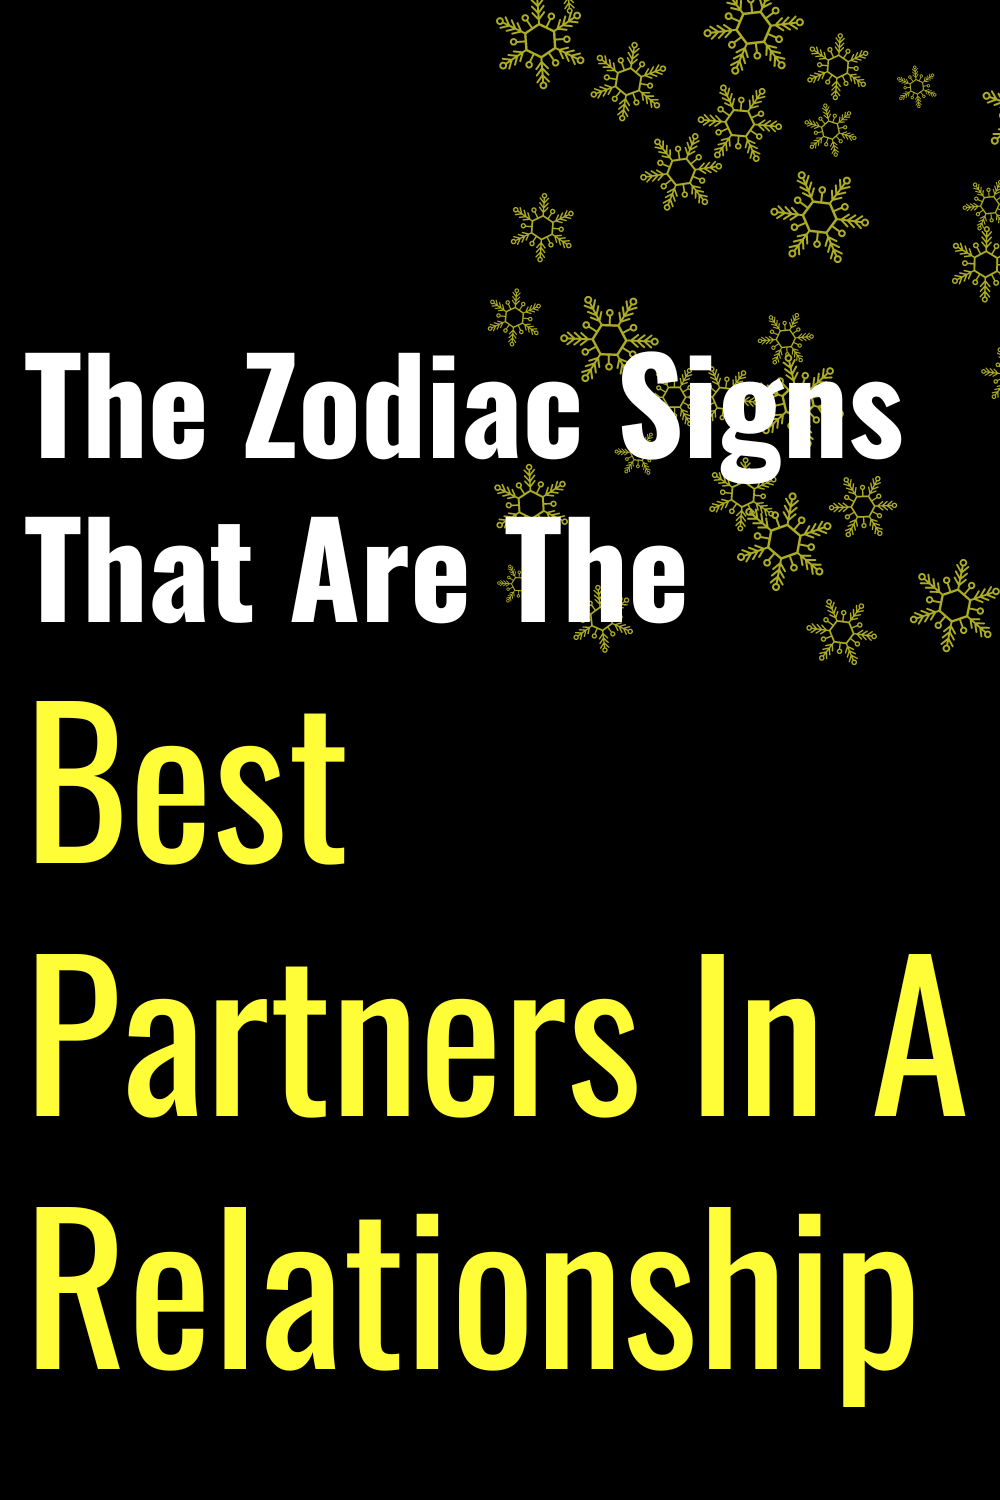 The Zodiac Signs That Are The Best Partners In A Relationship